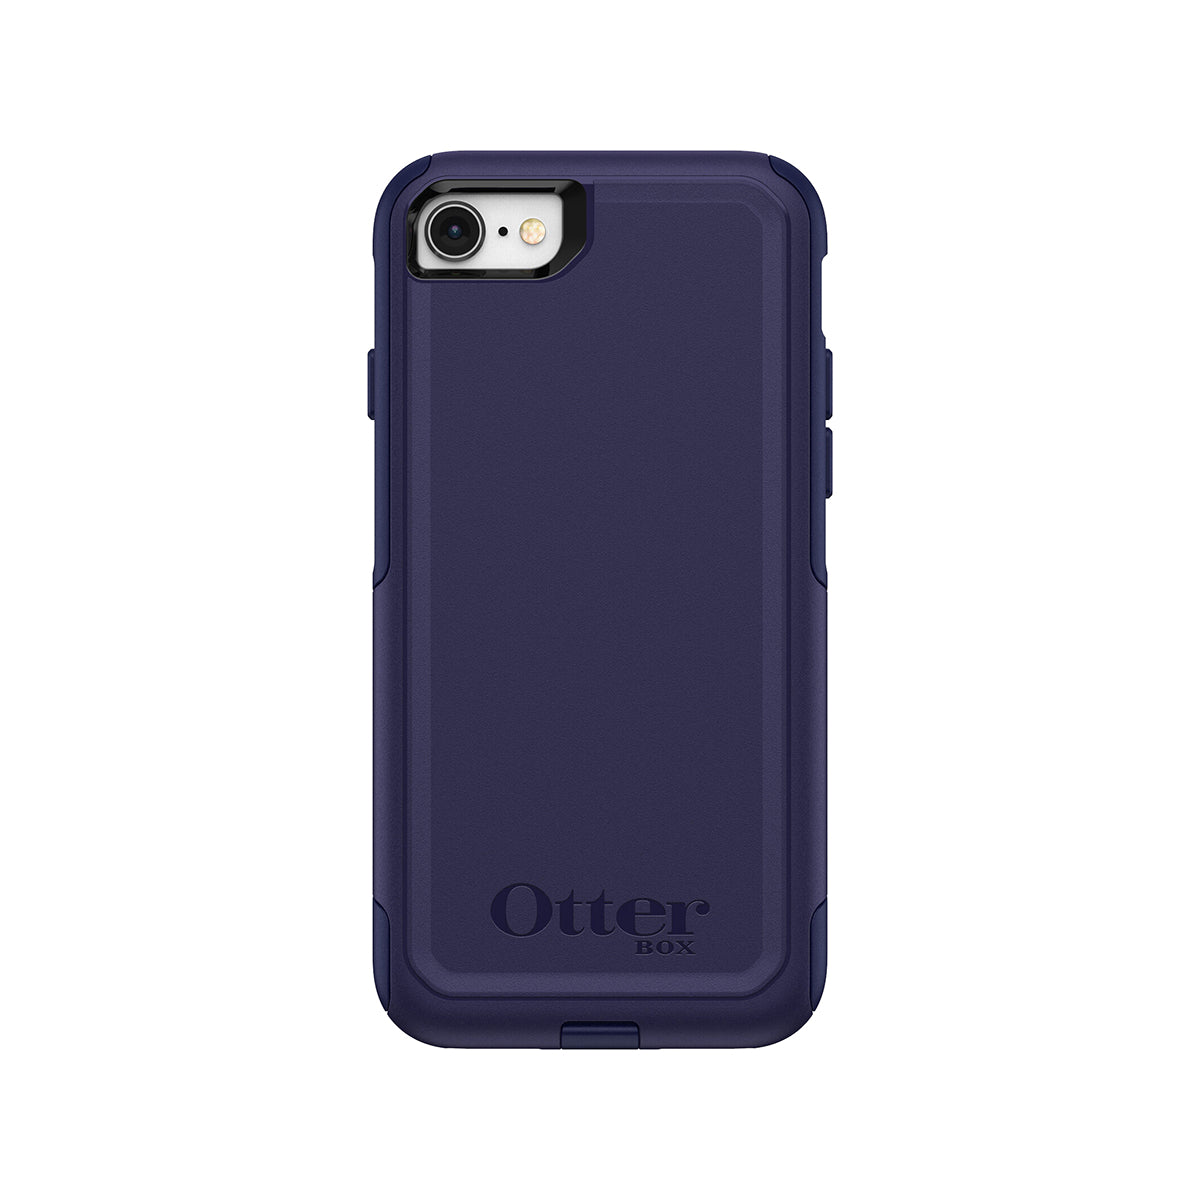 Otterbox Commuter Phone Case for iPhone 7/8 - Indigo Way.